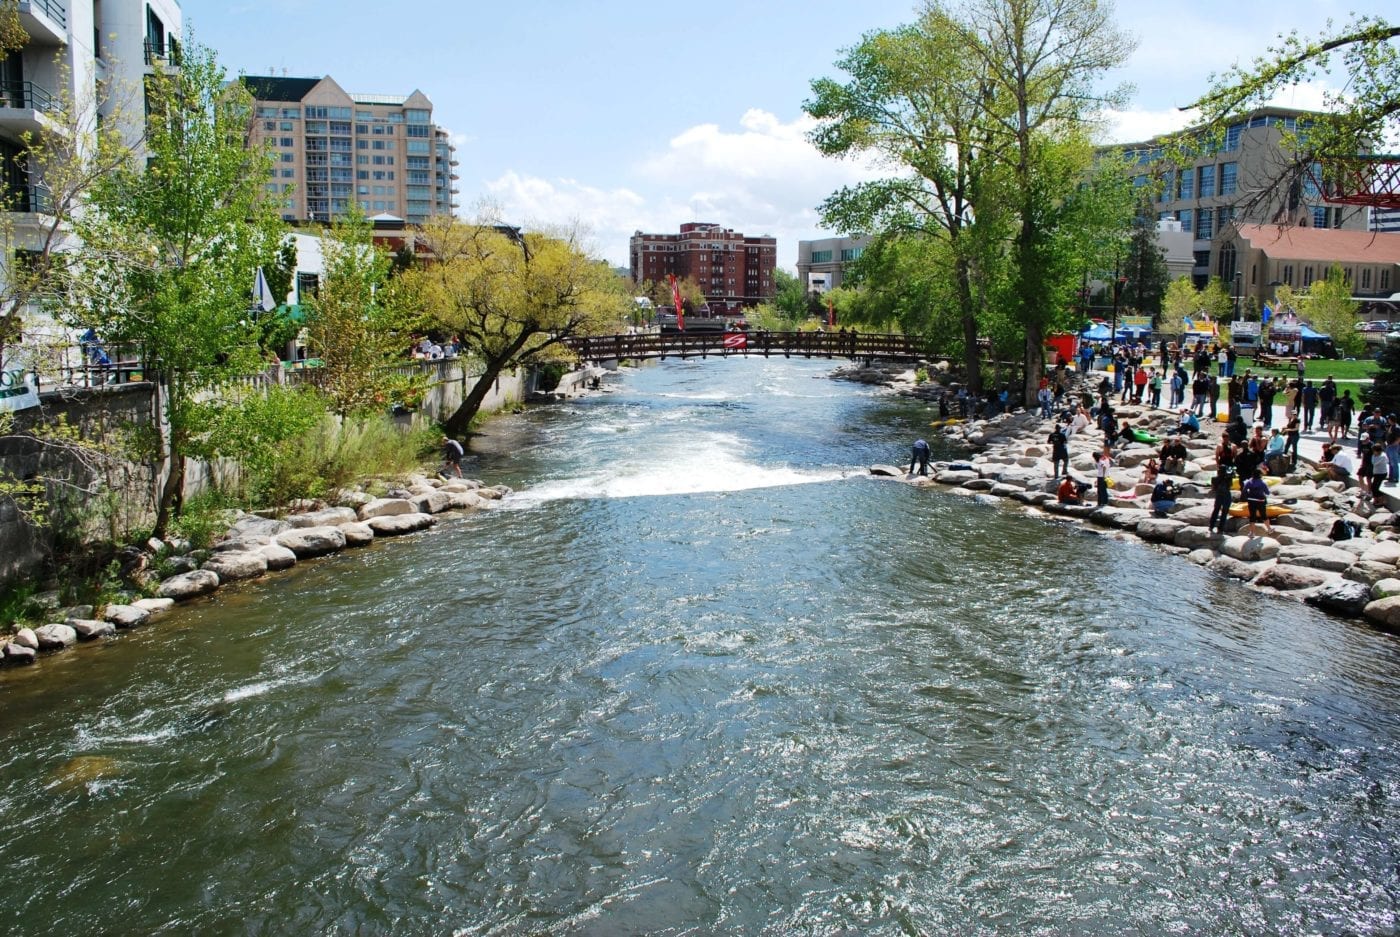 Truckee River in Reno©Reno-Sparks Convention & Visitors Authority